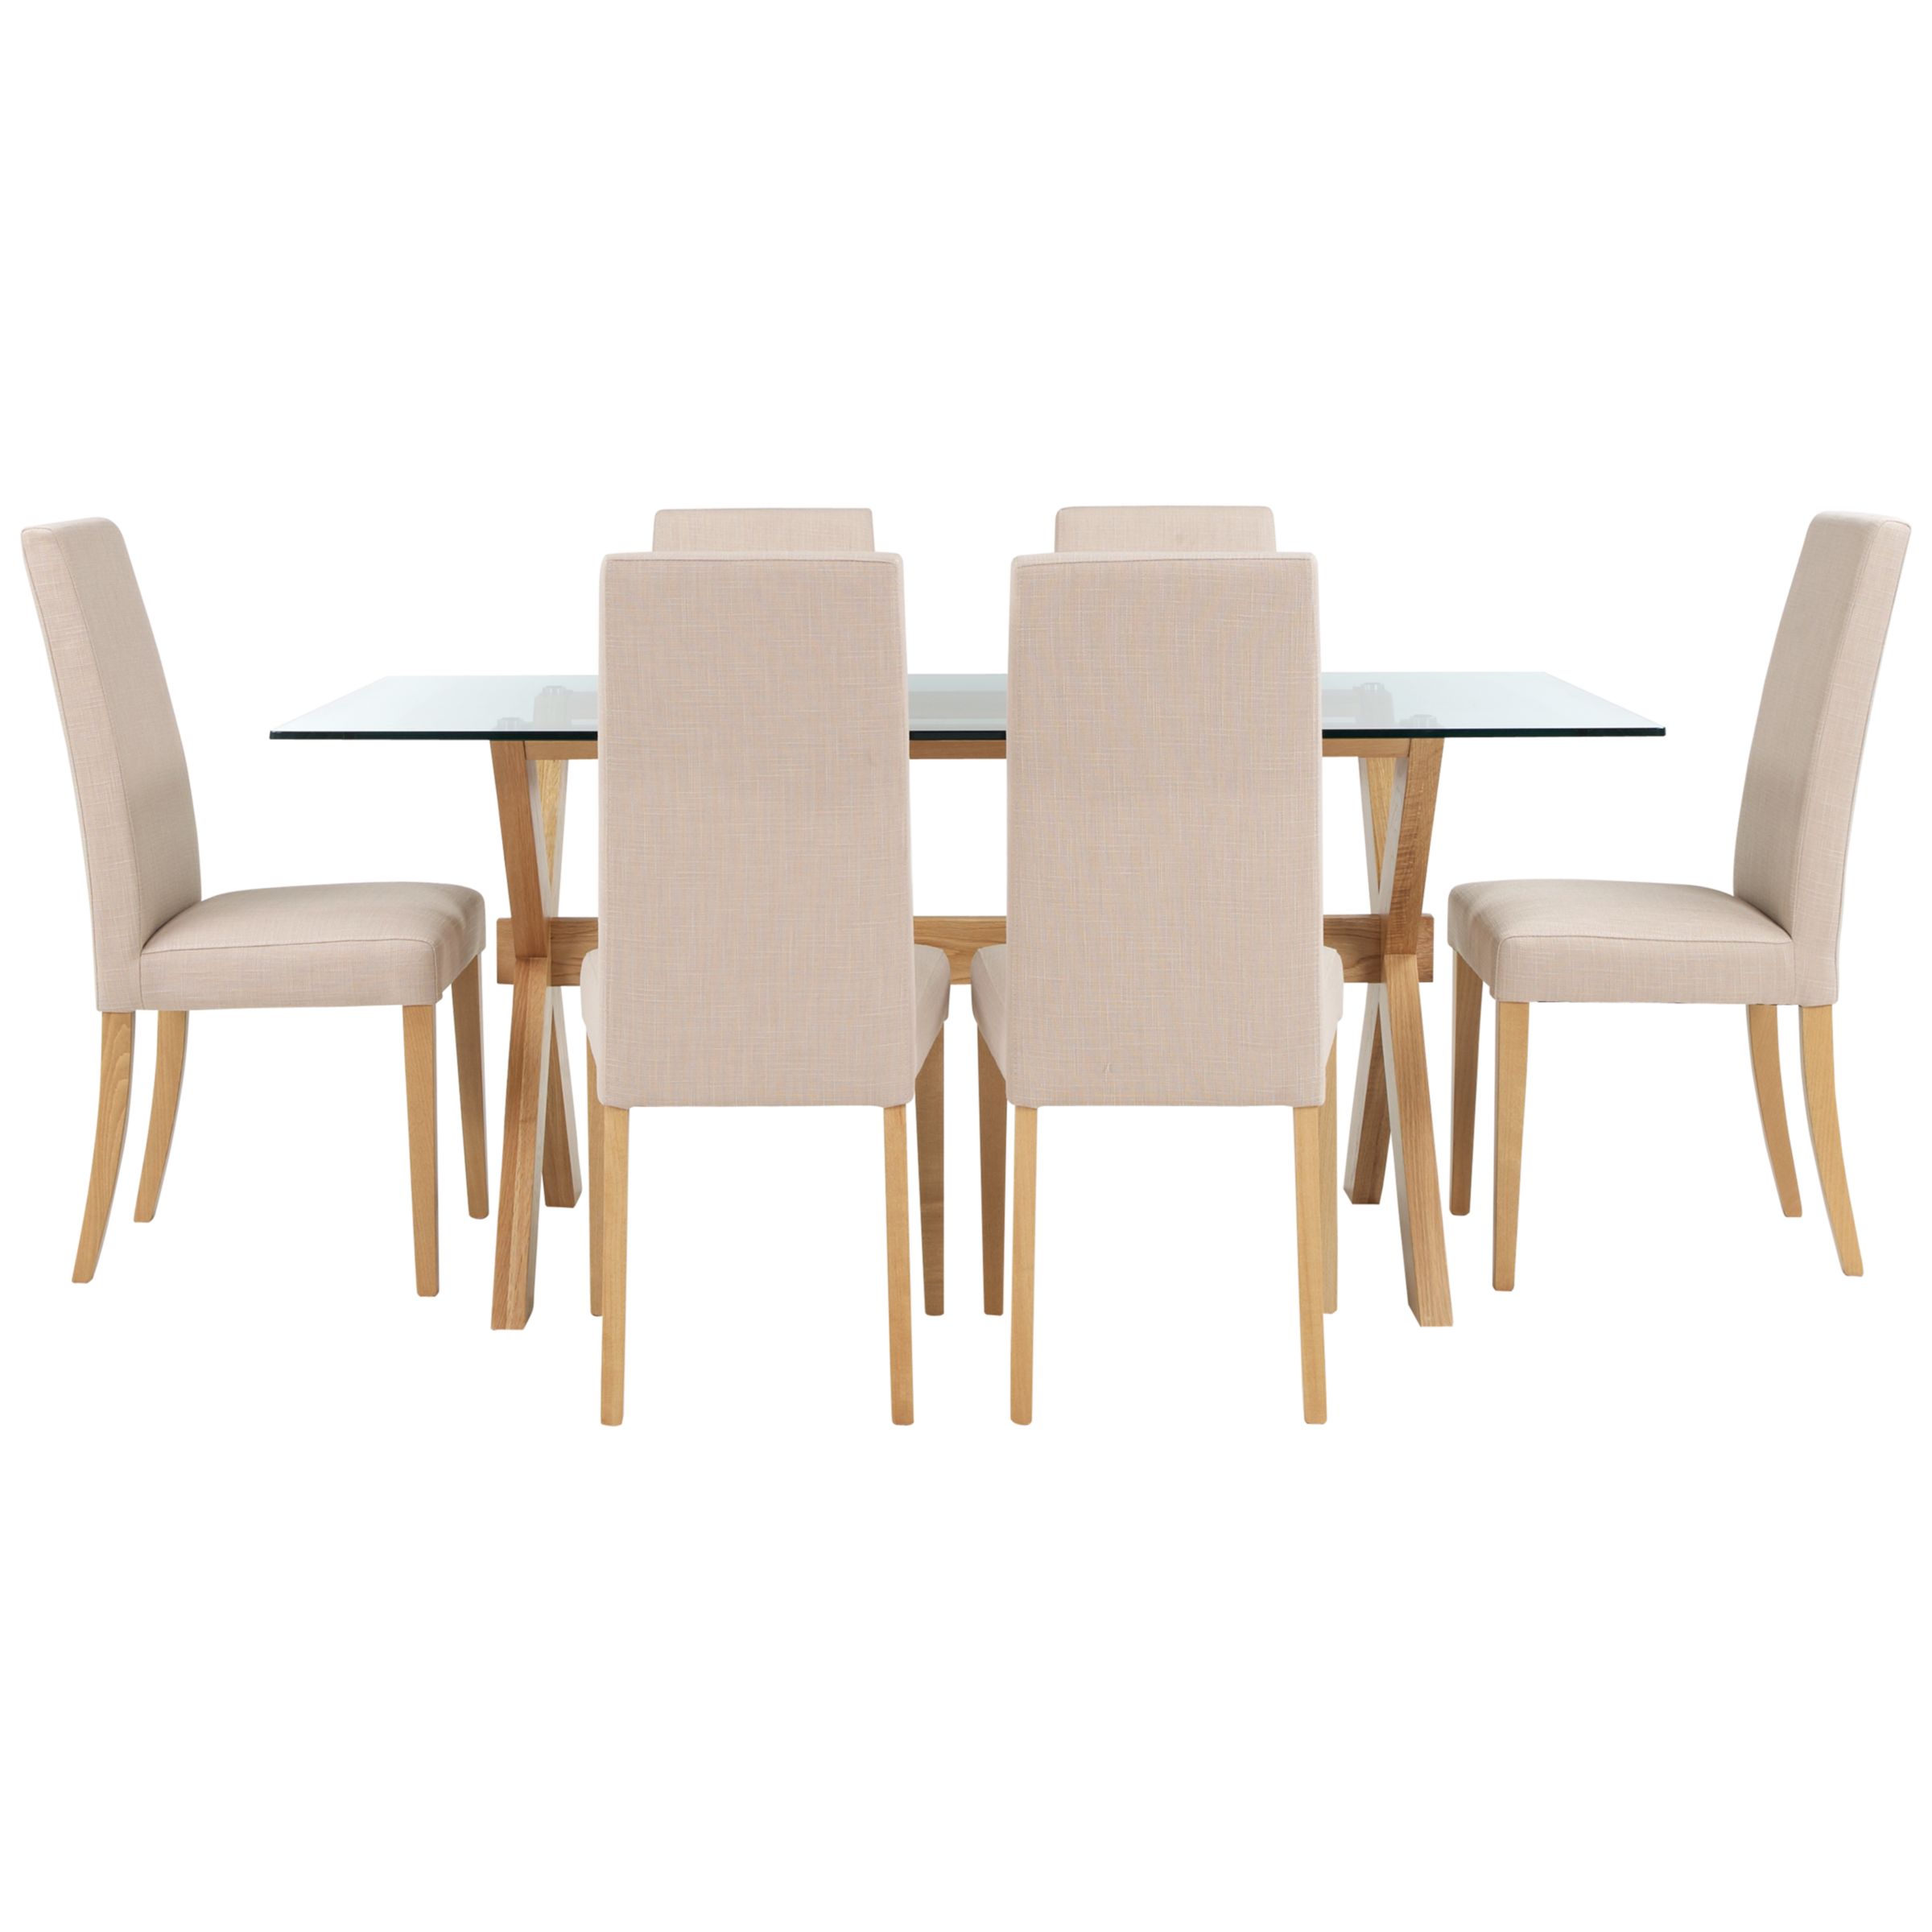 John Lewis Gene Dining Table and 6 Lydia Chairs in Fawn, width 170cm